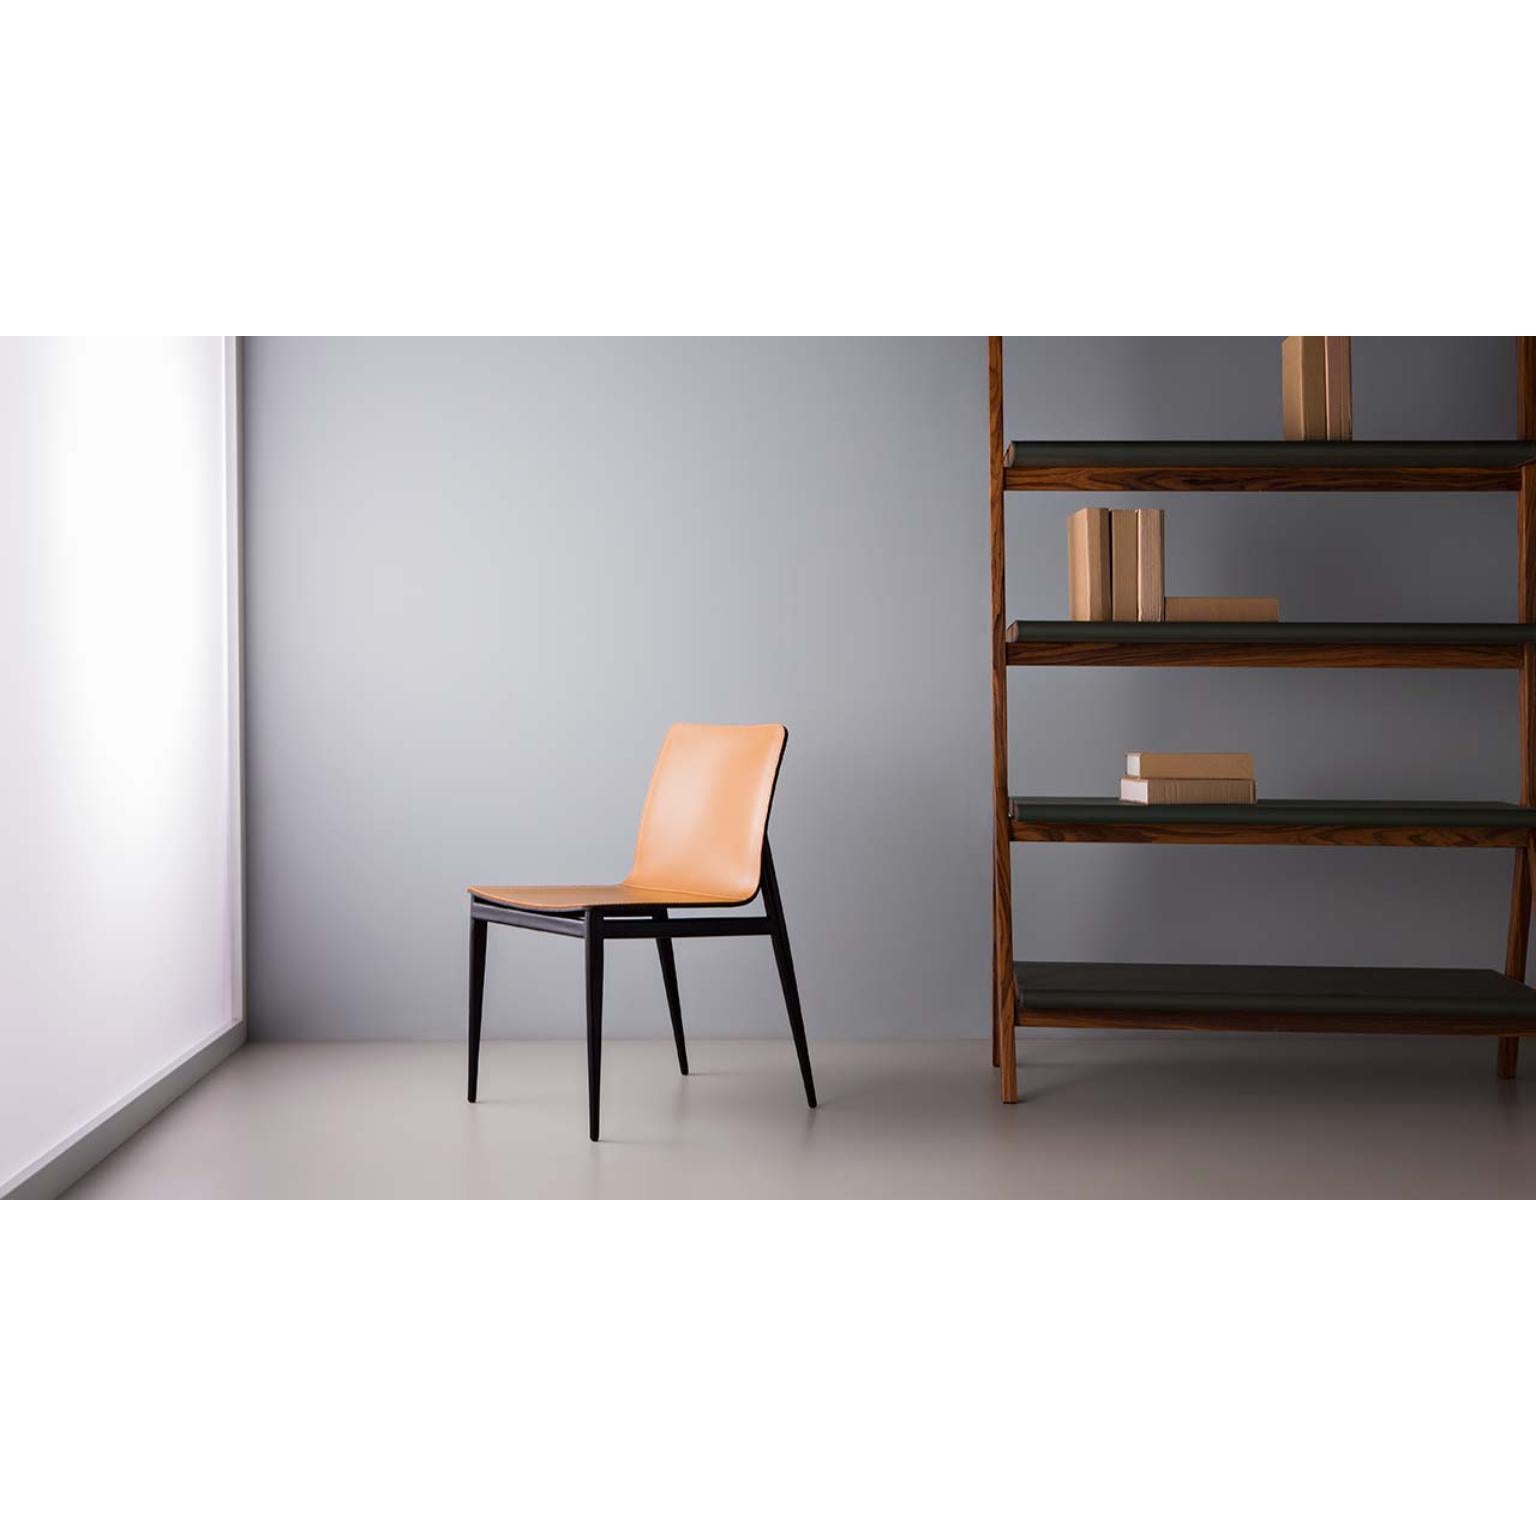 Full Chair by Doimo Brasil
Dimensions: W 50 x D 59 x H 80 cm 
Materials: Metal, Natural leather.


With the intention of providing good taste and personality, Doimo deciphers trends and follows the evolution of man and his space. To this end, it